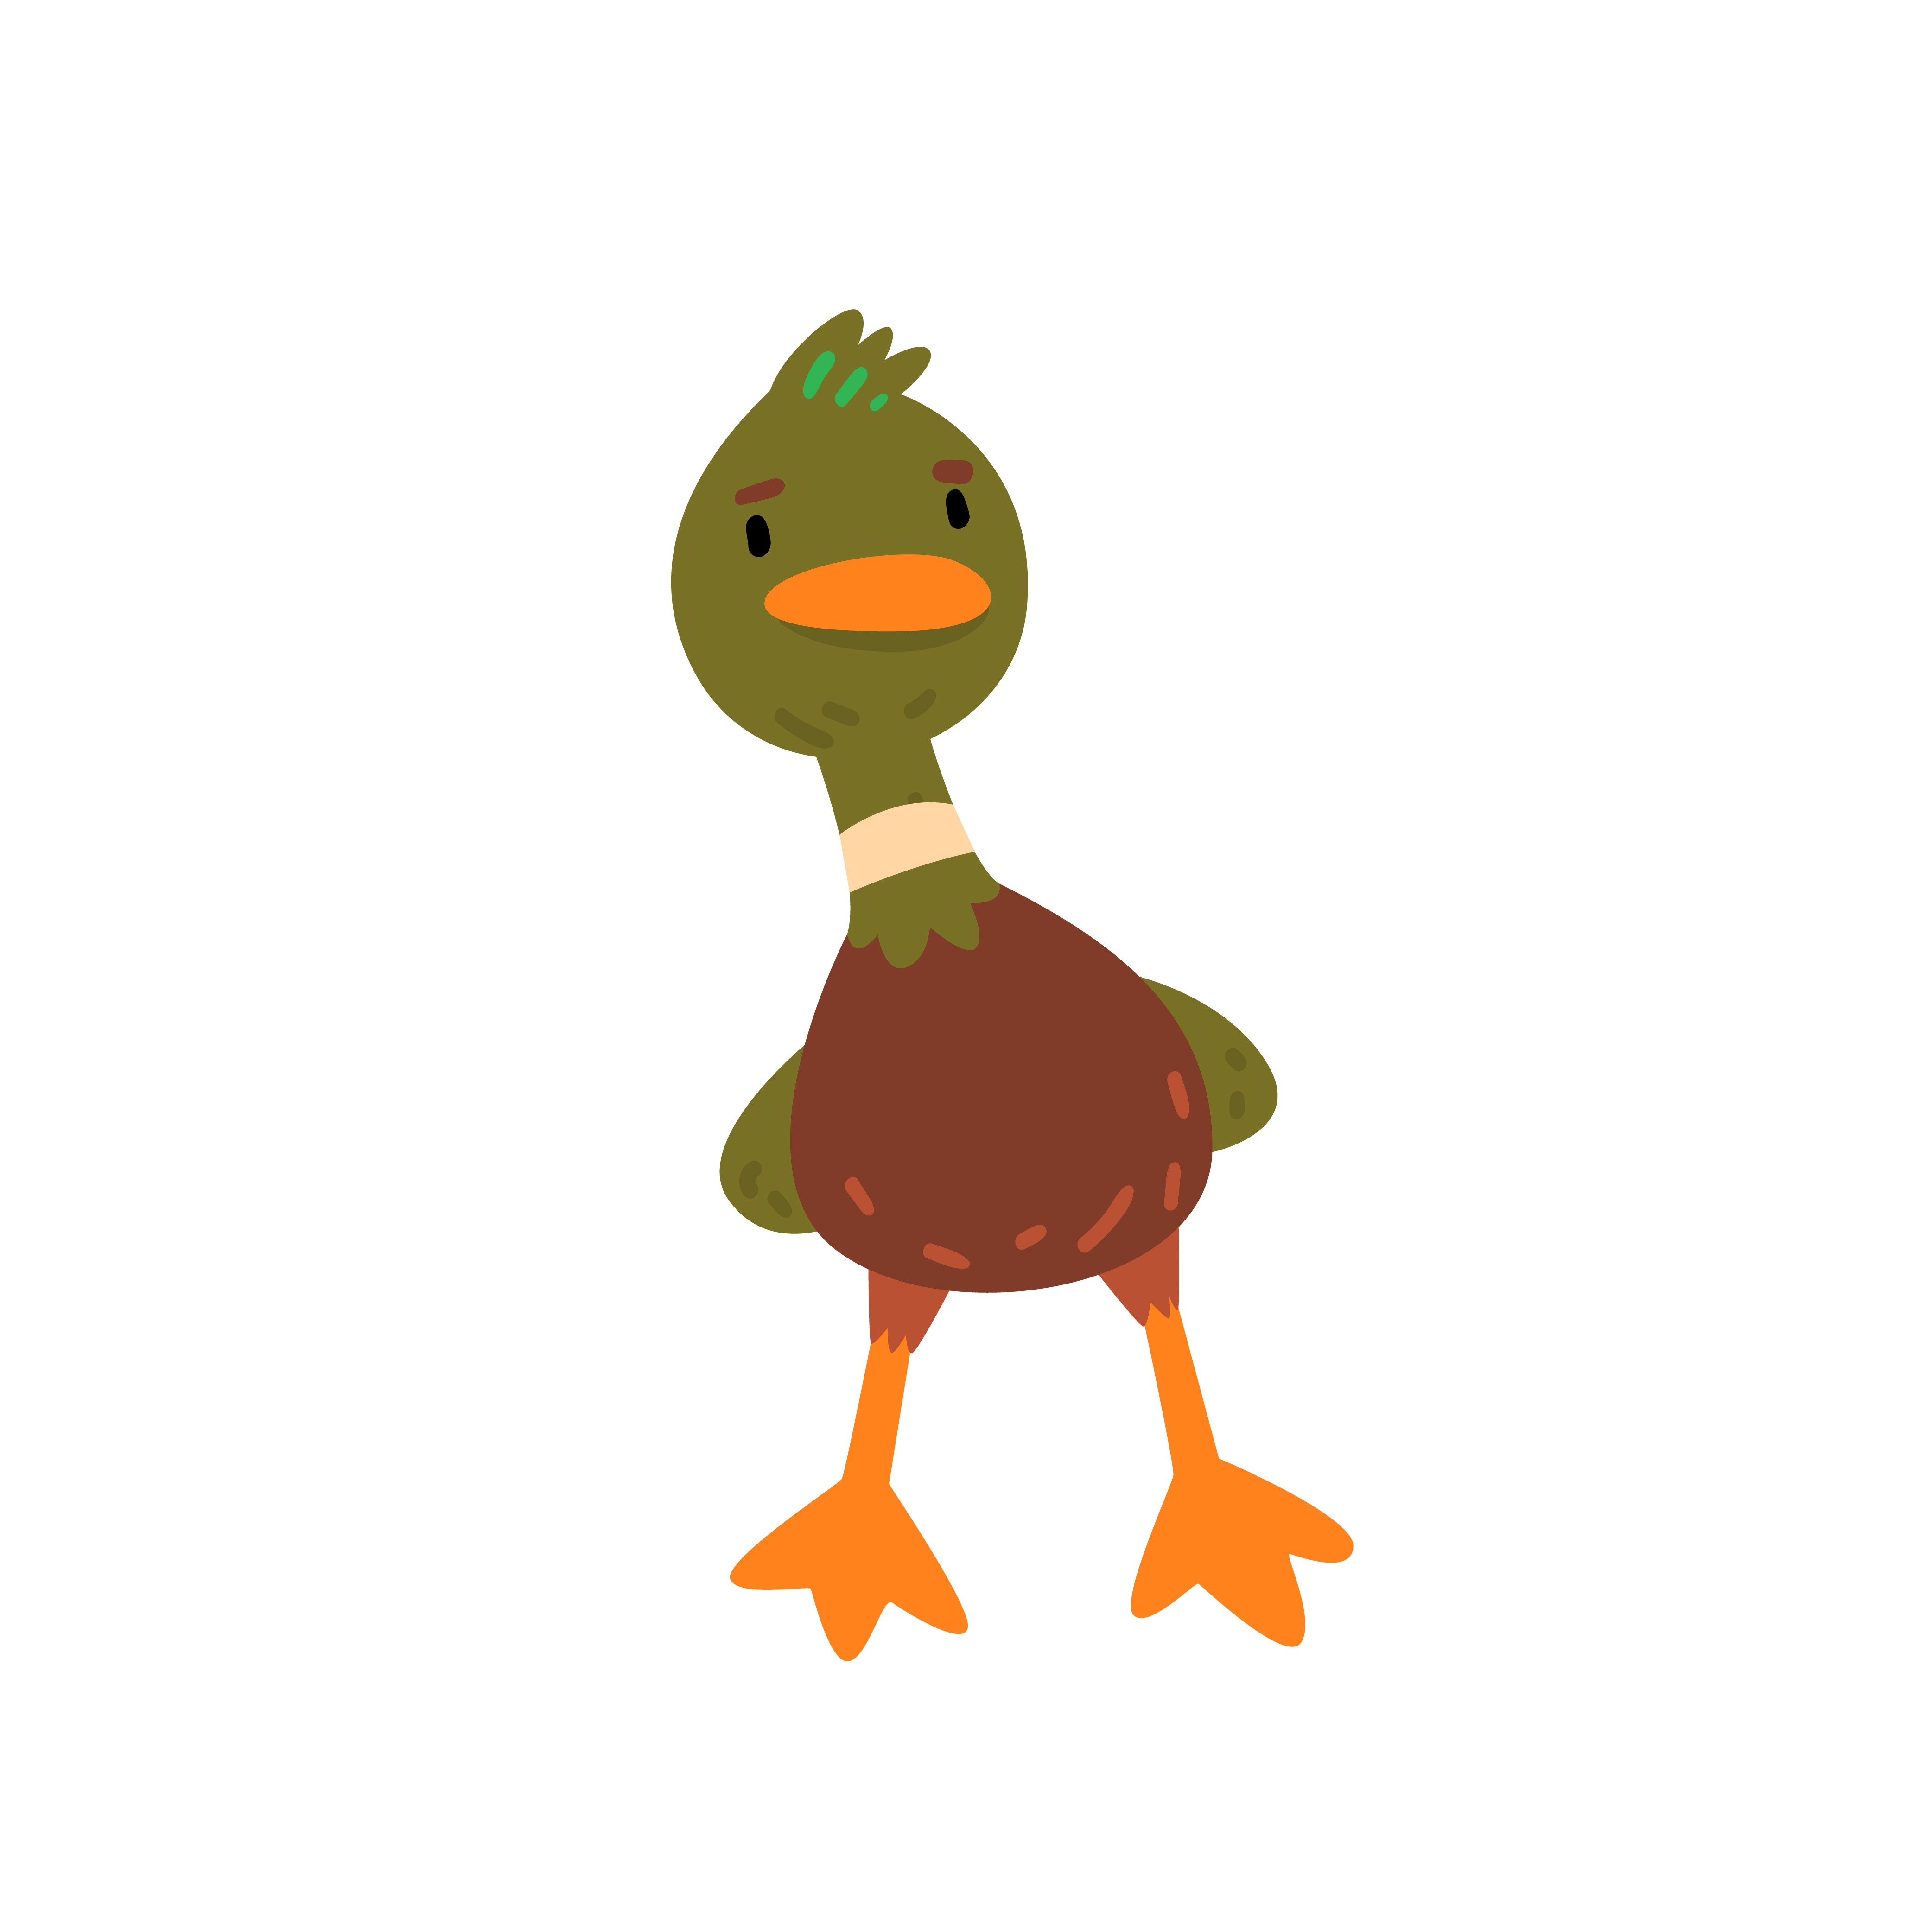 Male Mallard Duck, Cute Funny Duckling Cartoon Character Front View Vector Illustration on White Background.